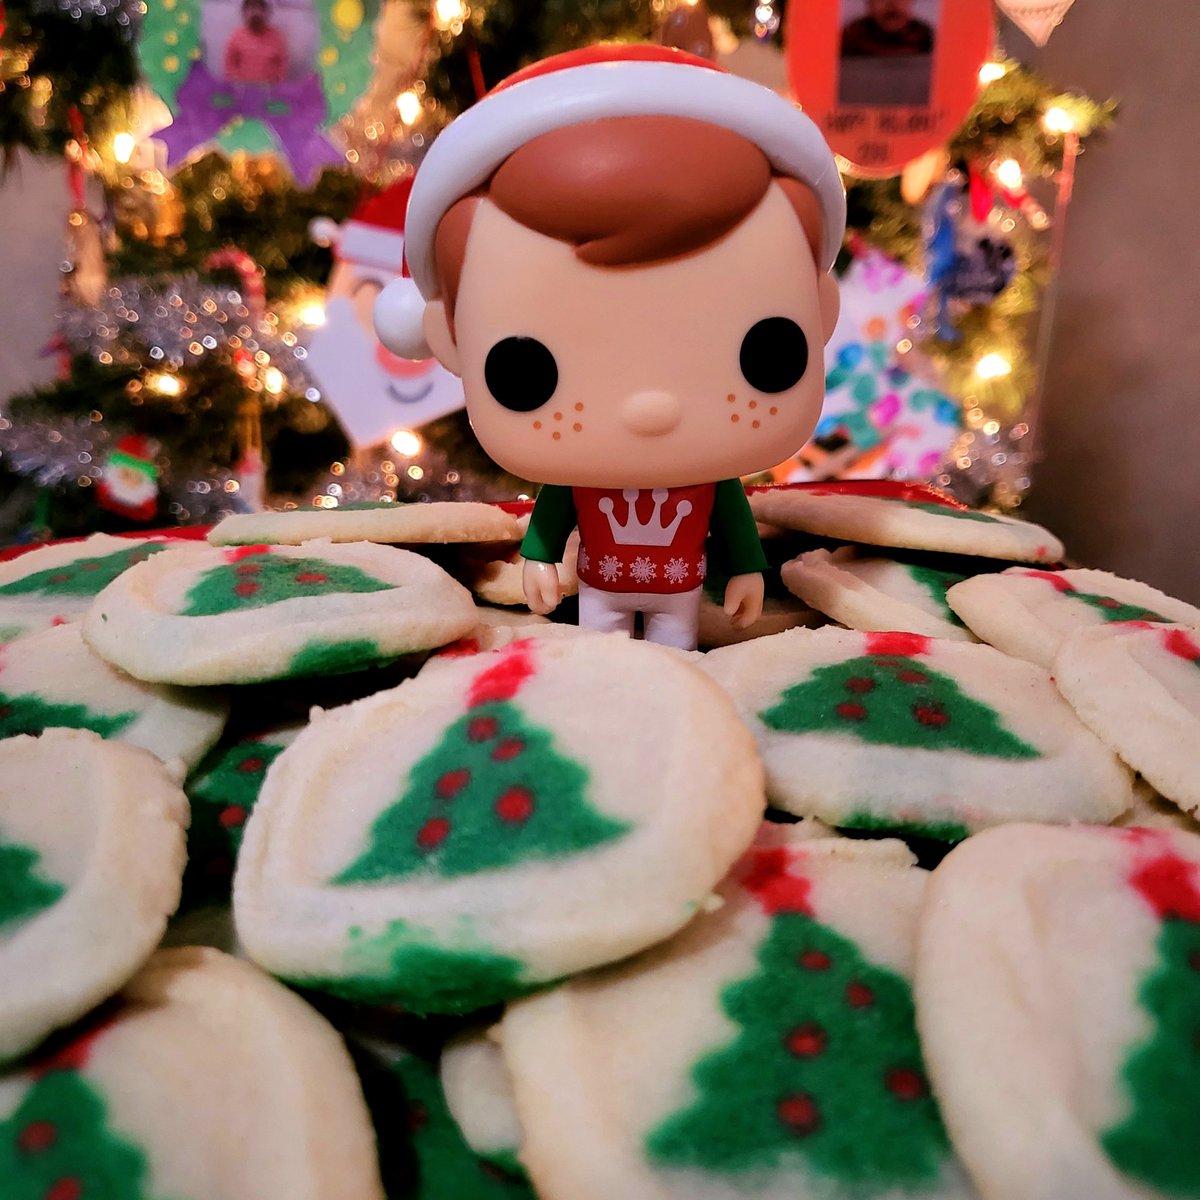 Dec 21: Holiday Baking Freddy is helping out with our holiday baking! @OriginalFunko #FunkoPhotoADayChallenge